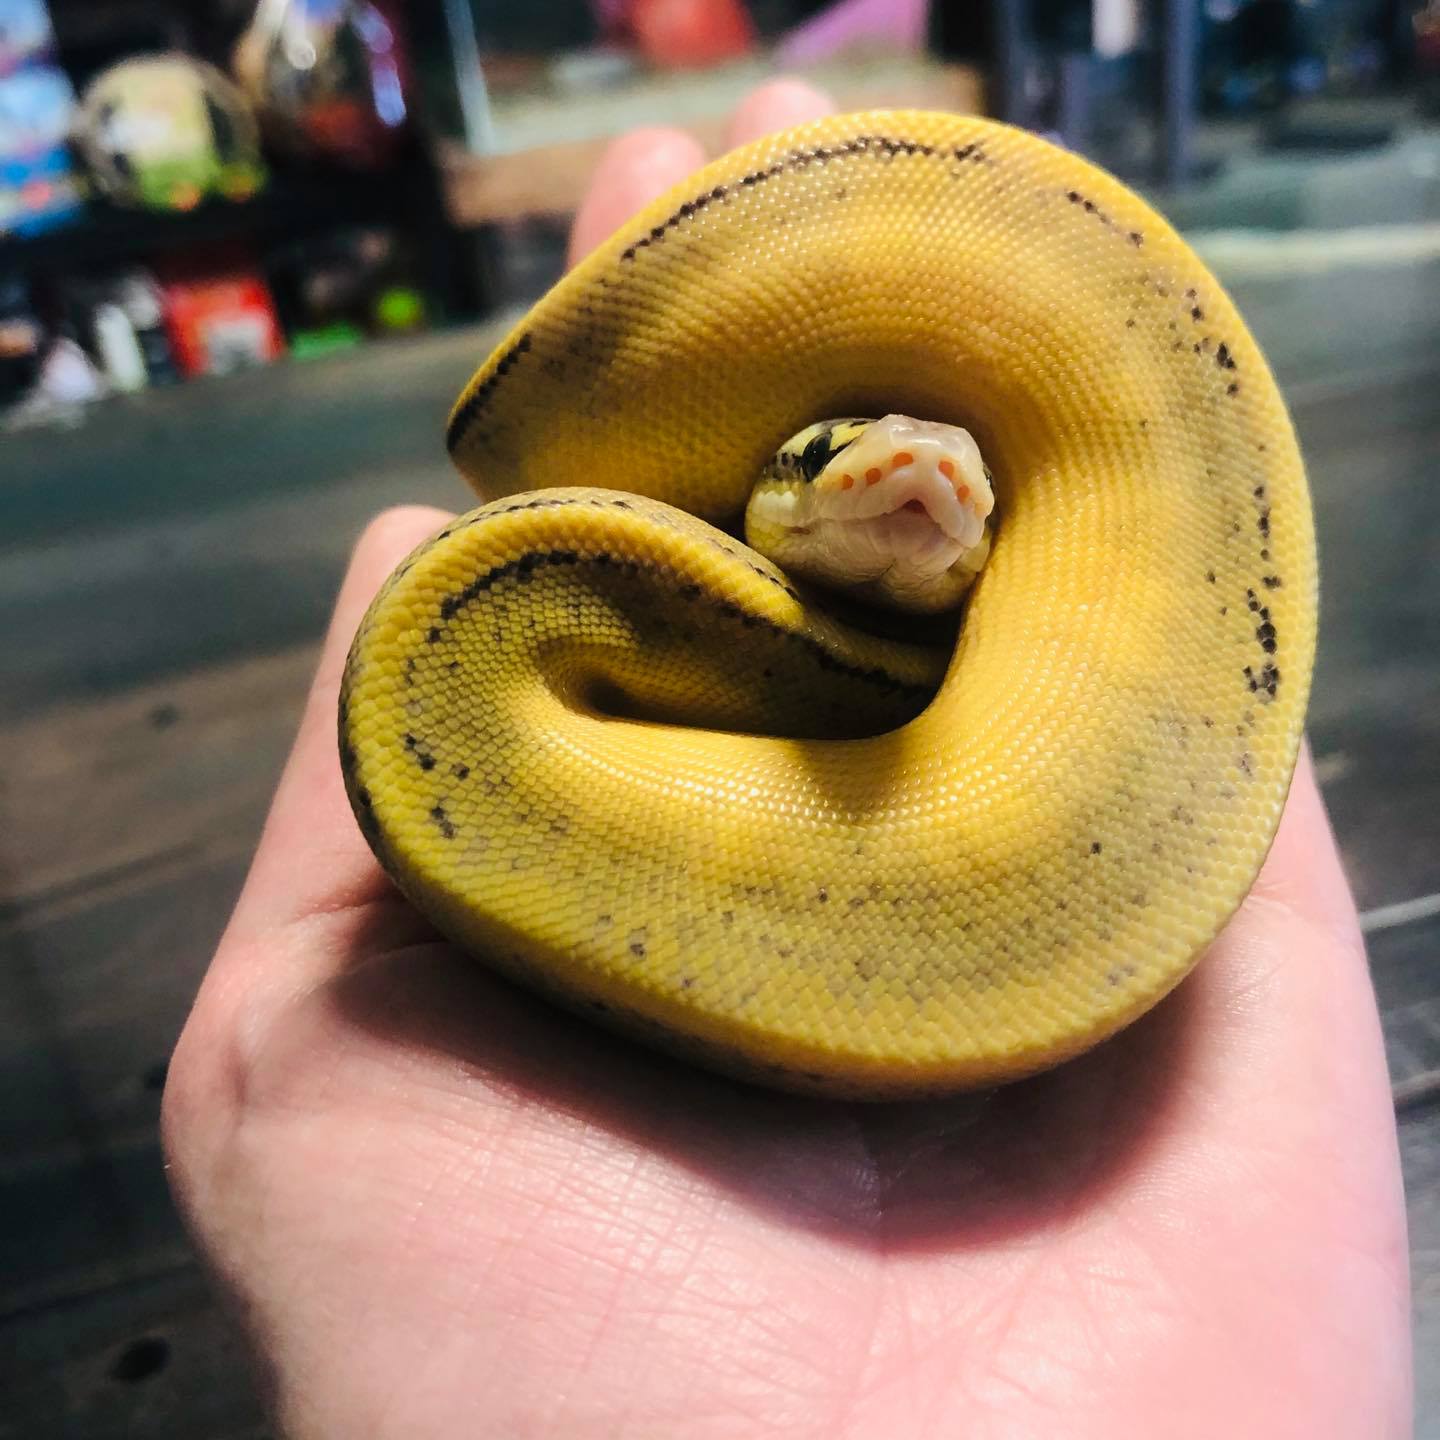 Ball Python Picture